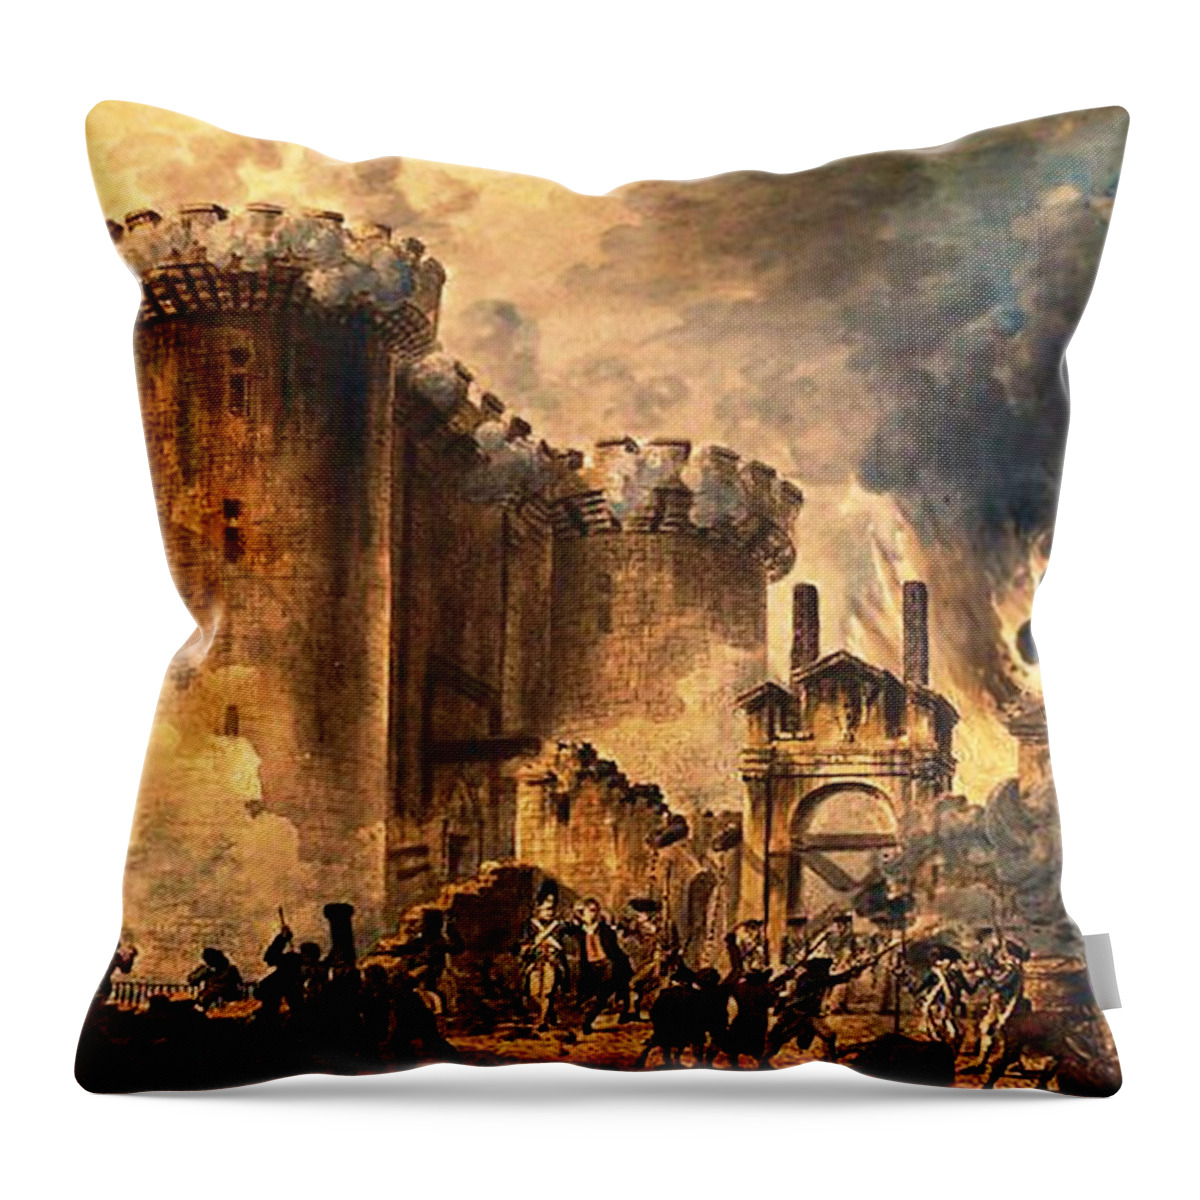 Storming Of The Bastille Throw Pillow featuring the painting Storming of the Bastille by Jean-Pierre Houel